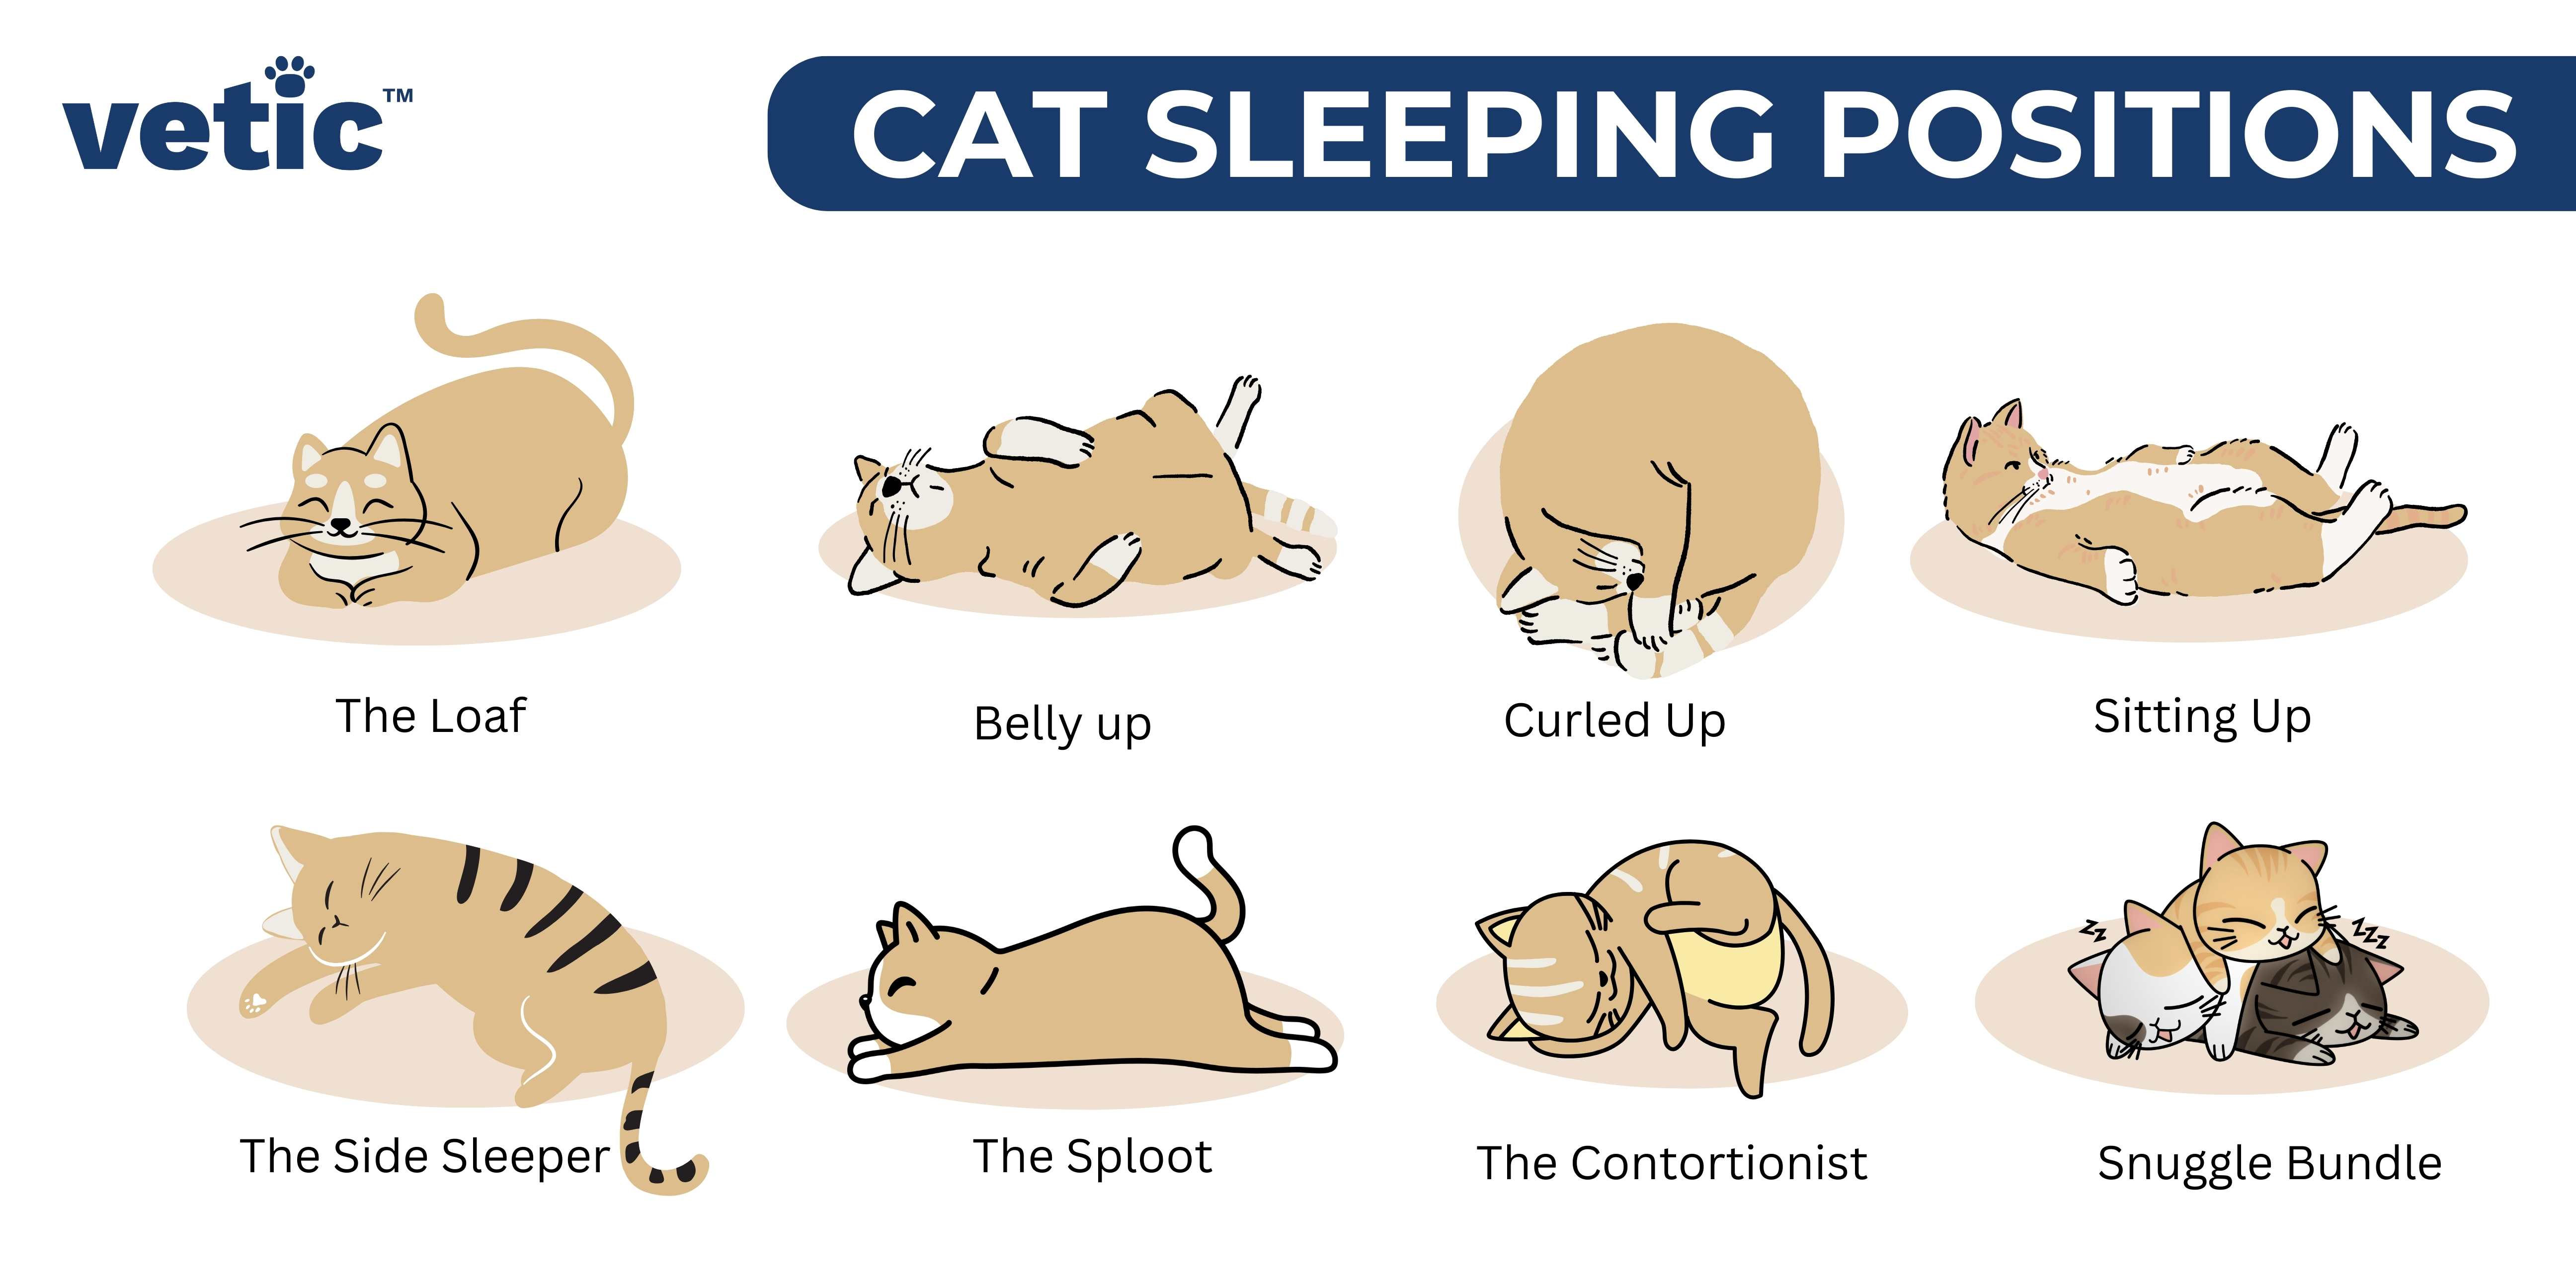 An infographic showing different cat sleeping positions. It shows 8 cat sleeping positions - 1. Loaf 2. Superman (Sploot) 3. Belly Up 4. Curled Up (Purr Ball) 5. Sitting Up (Back Sleeper) 6. The contortionist (Twister) 7. The Kitty Pile (Snuggler) 8. The Side Sleeper